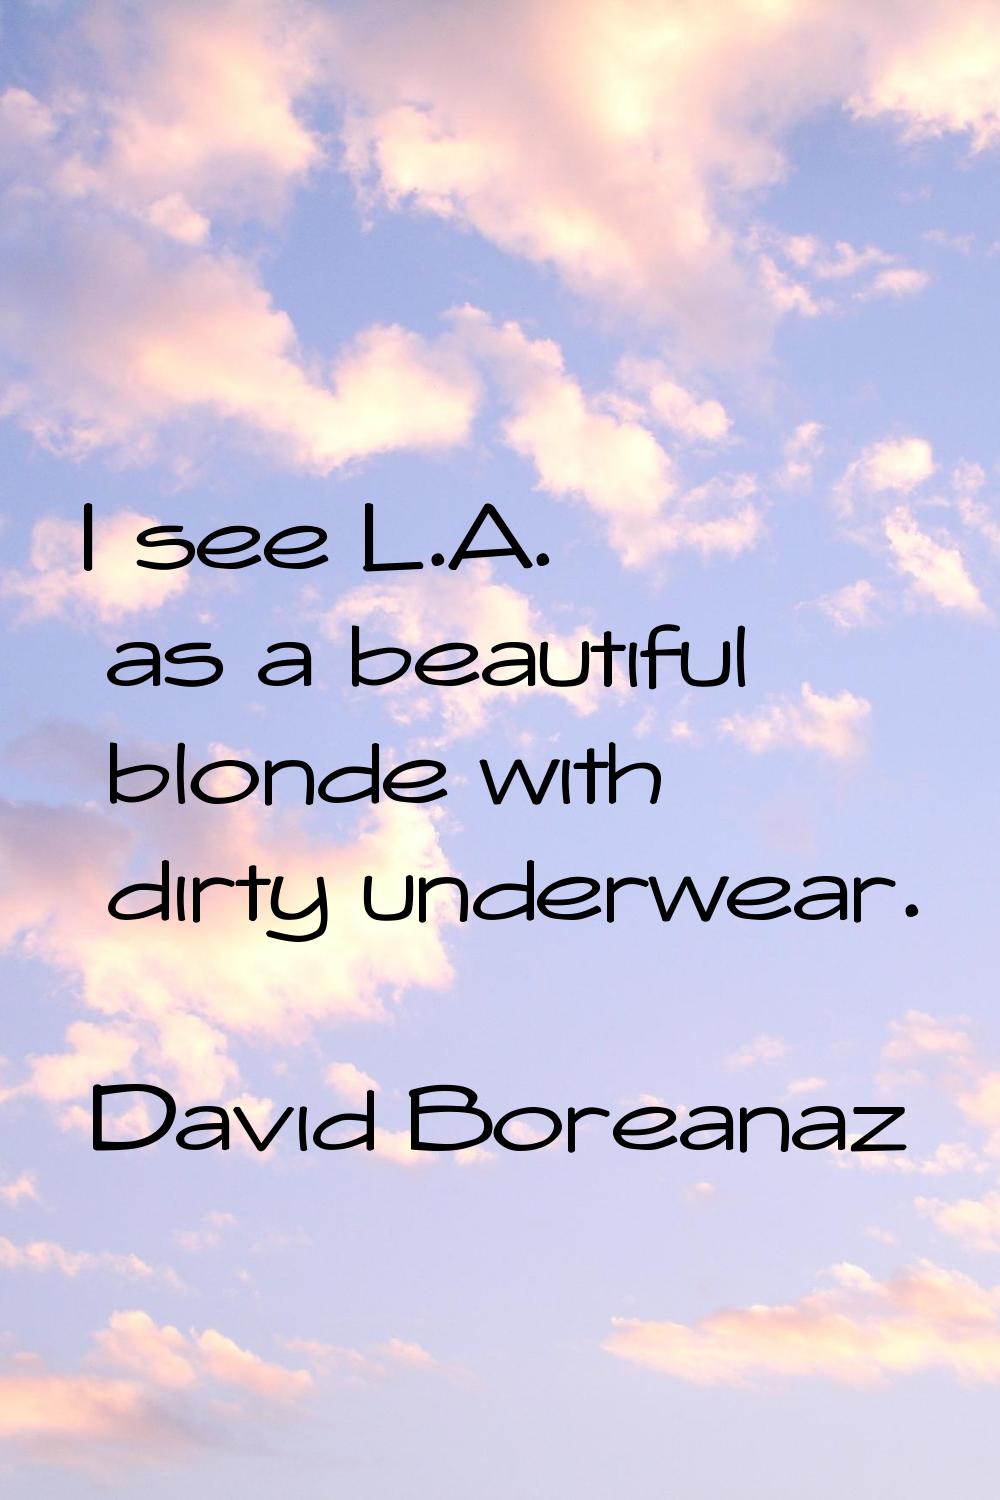 I see L.A. as a beautiful blonde with dirty underwear.